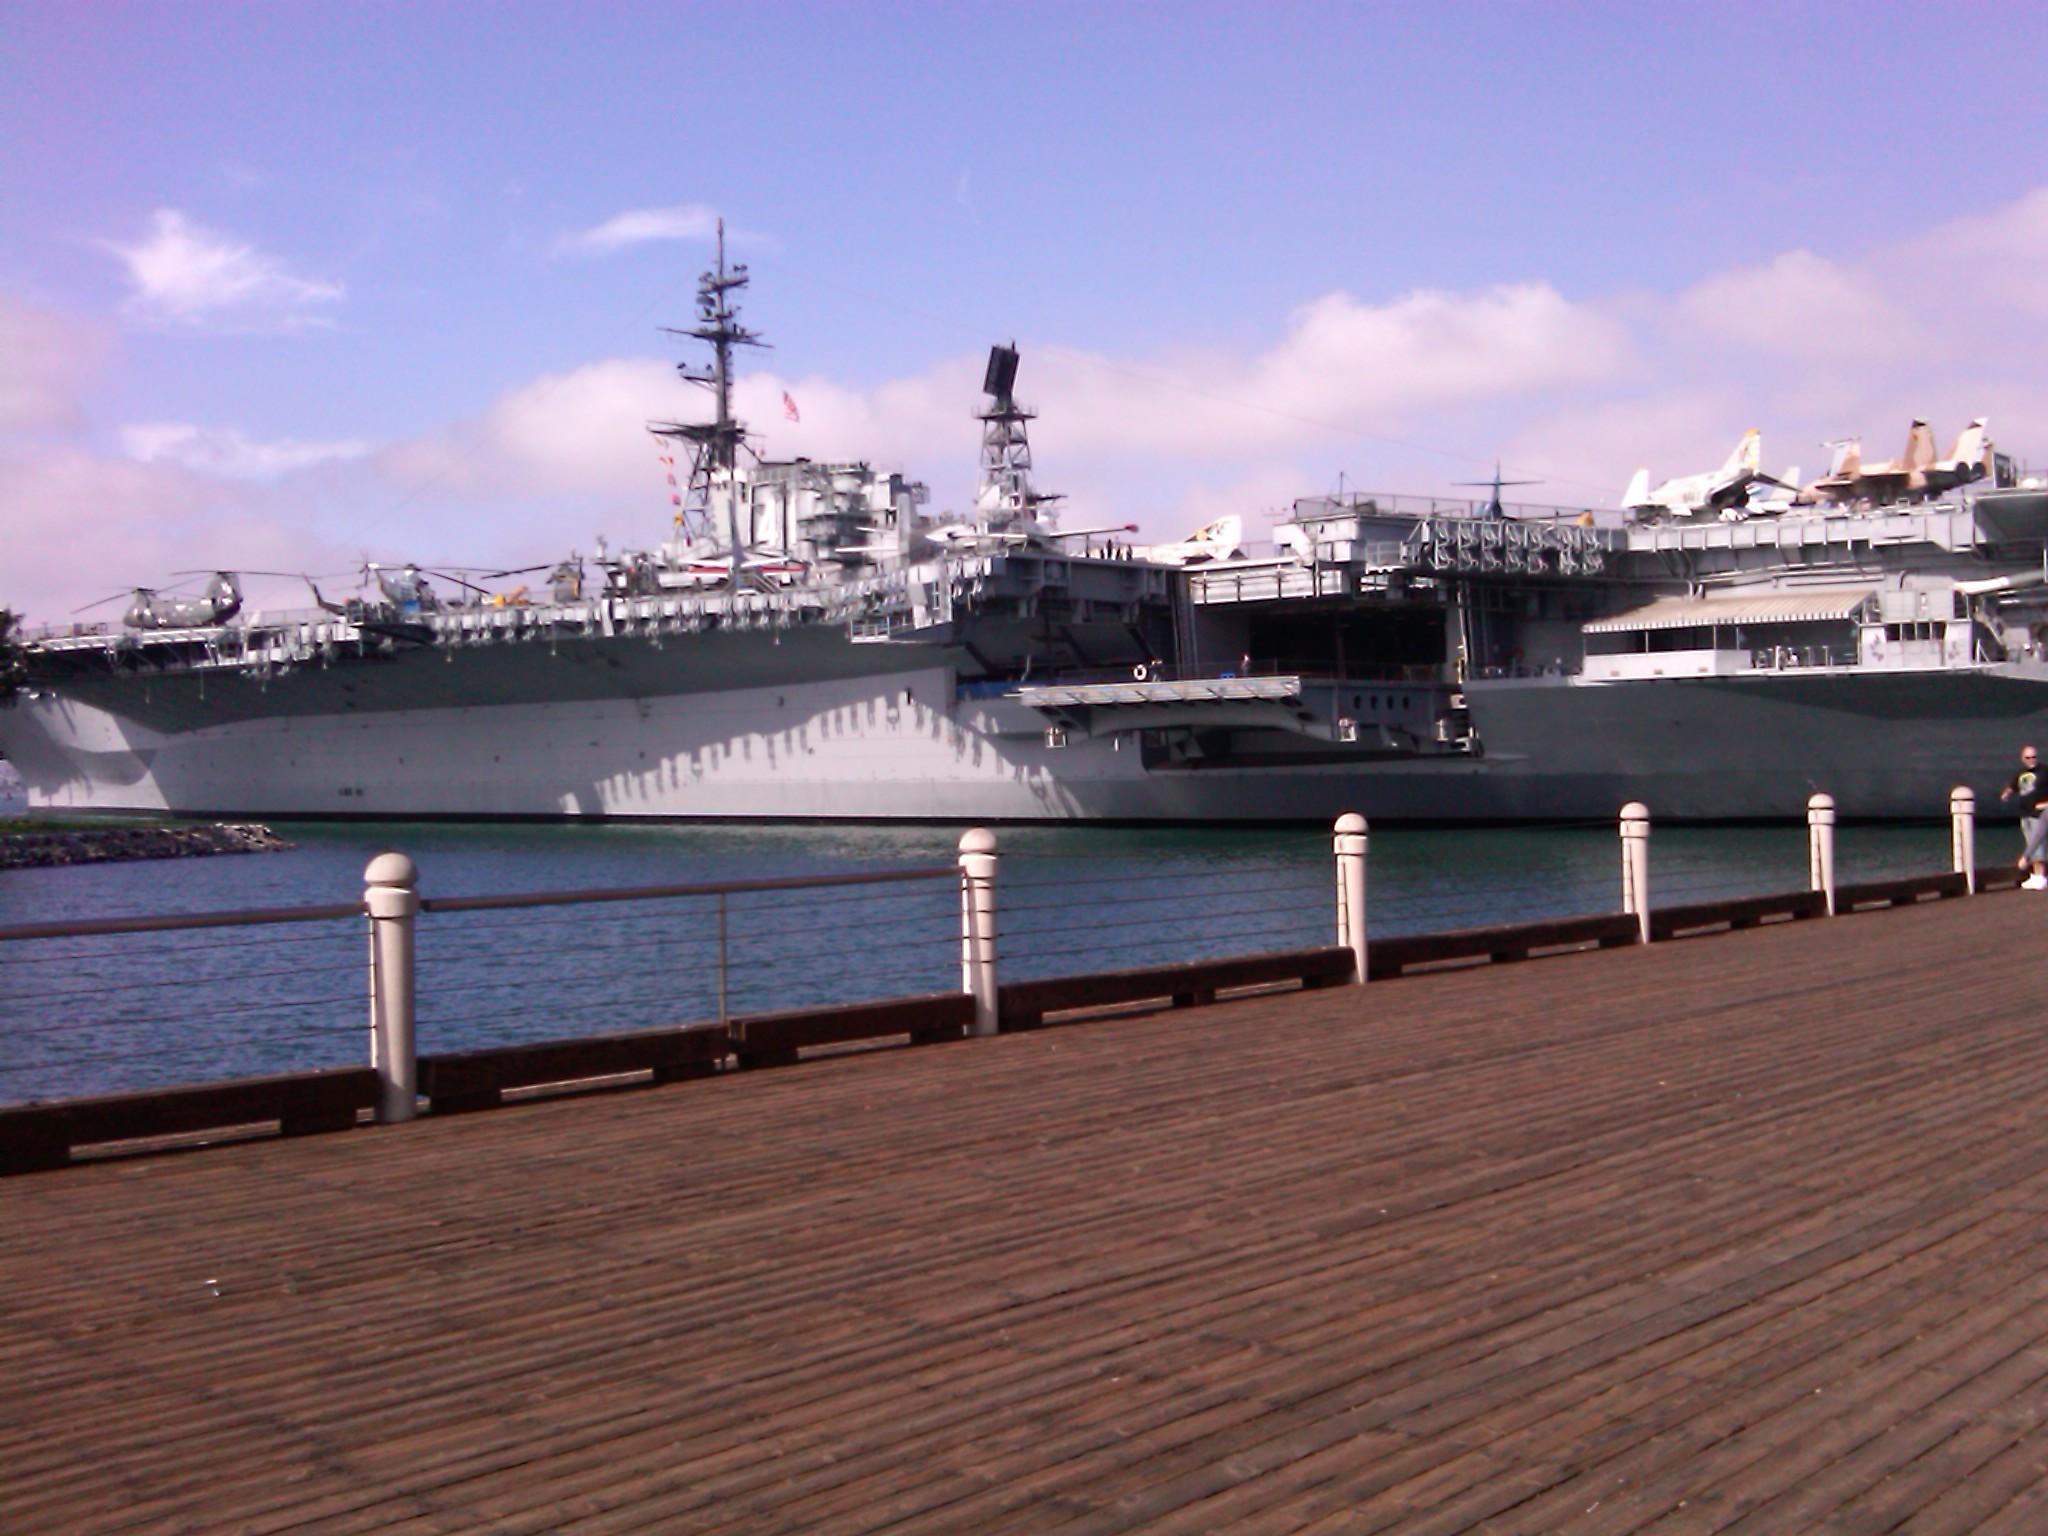 The Midway Battleship in San Diego, California